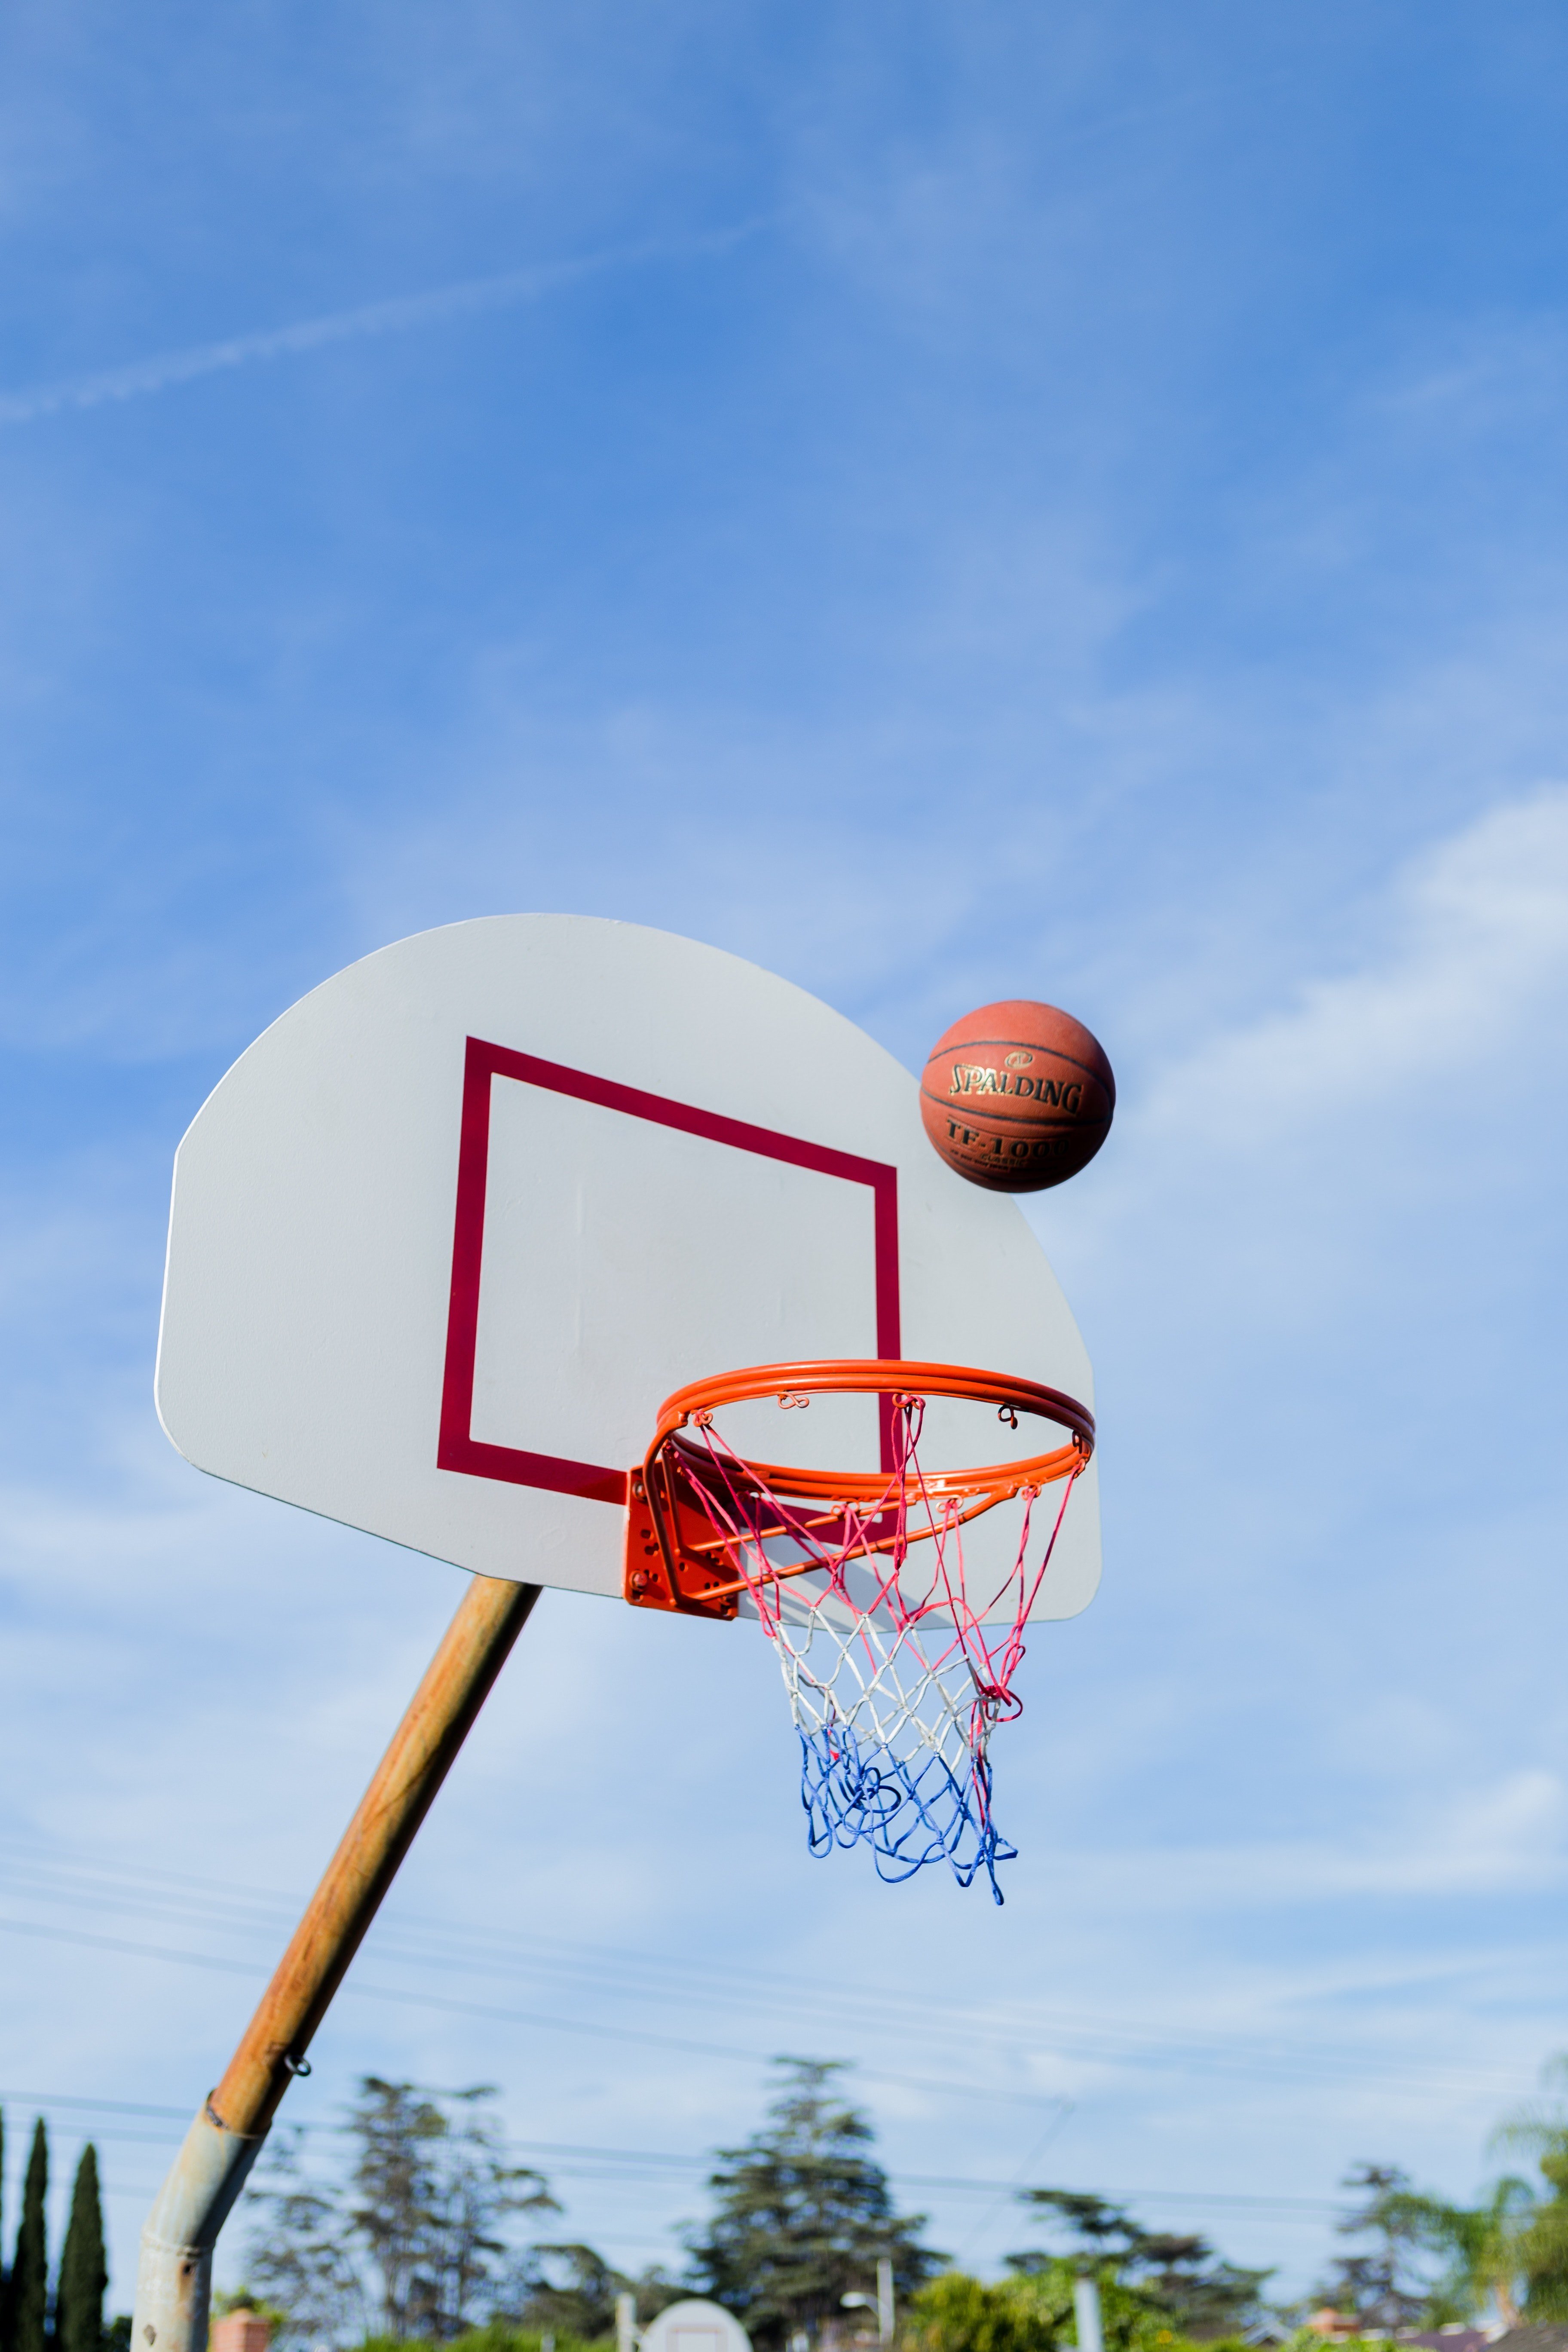 Wallpaper / a basketball about to enter a bball net in an outdoor court, _hoops 4k wallpaper free download